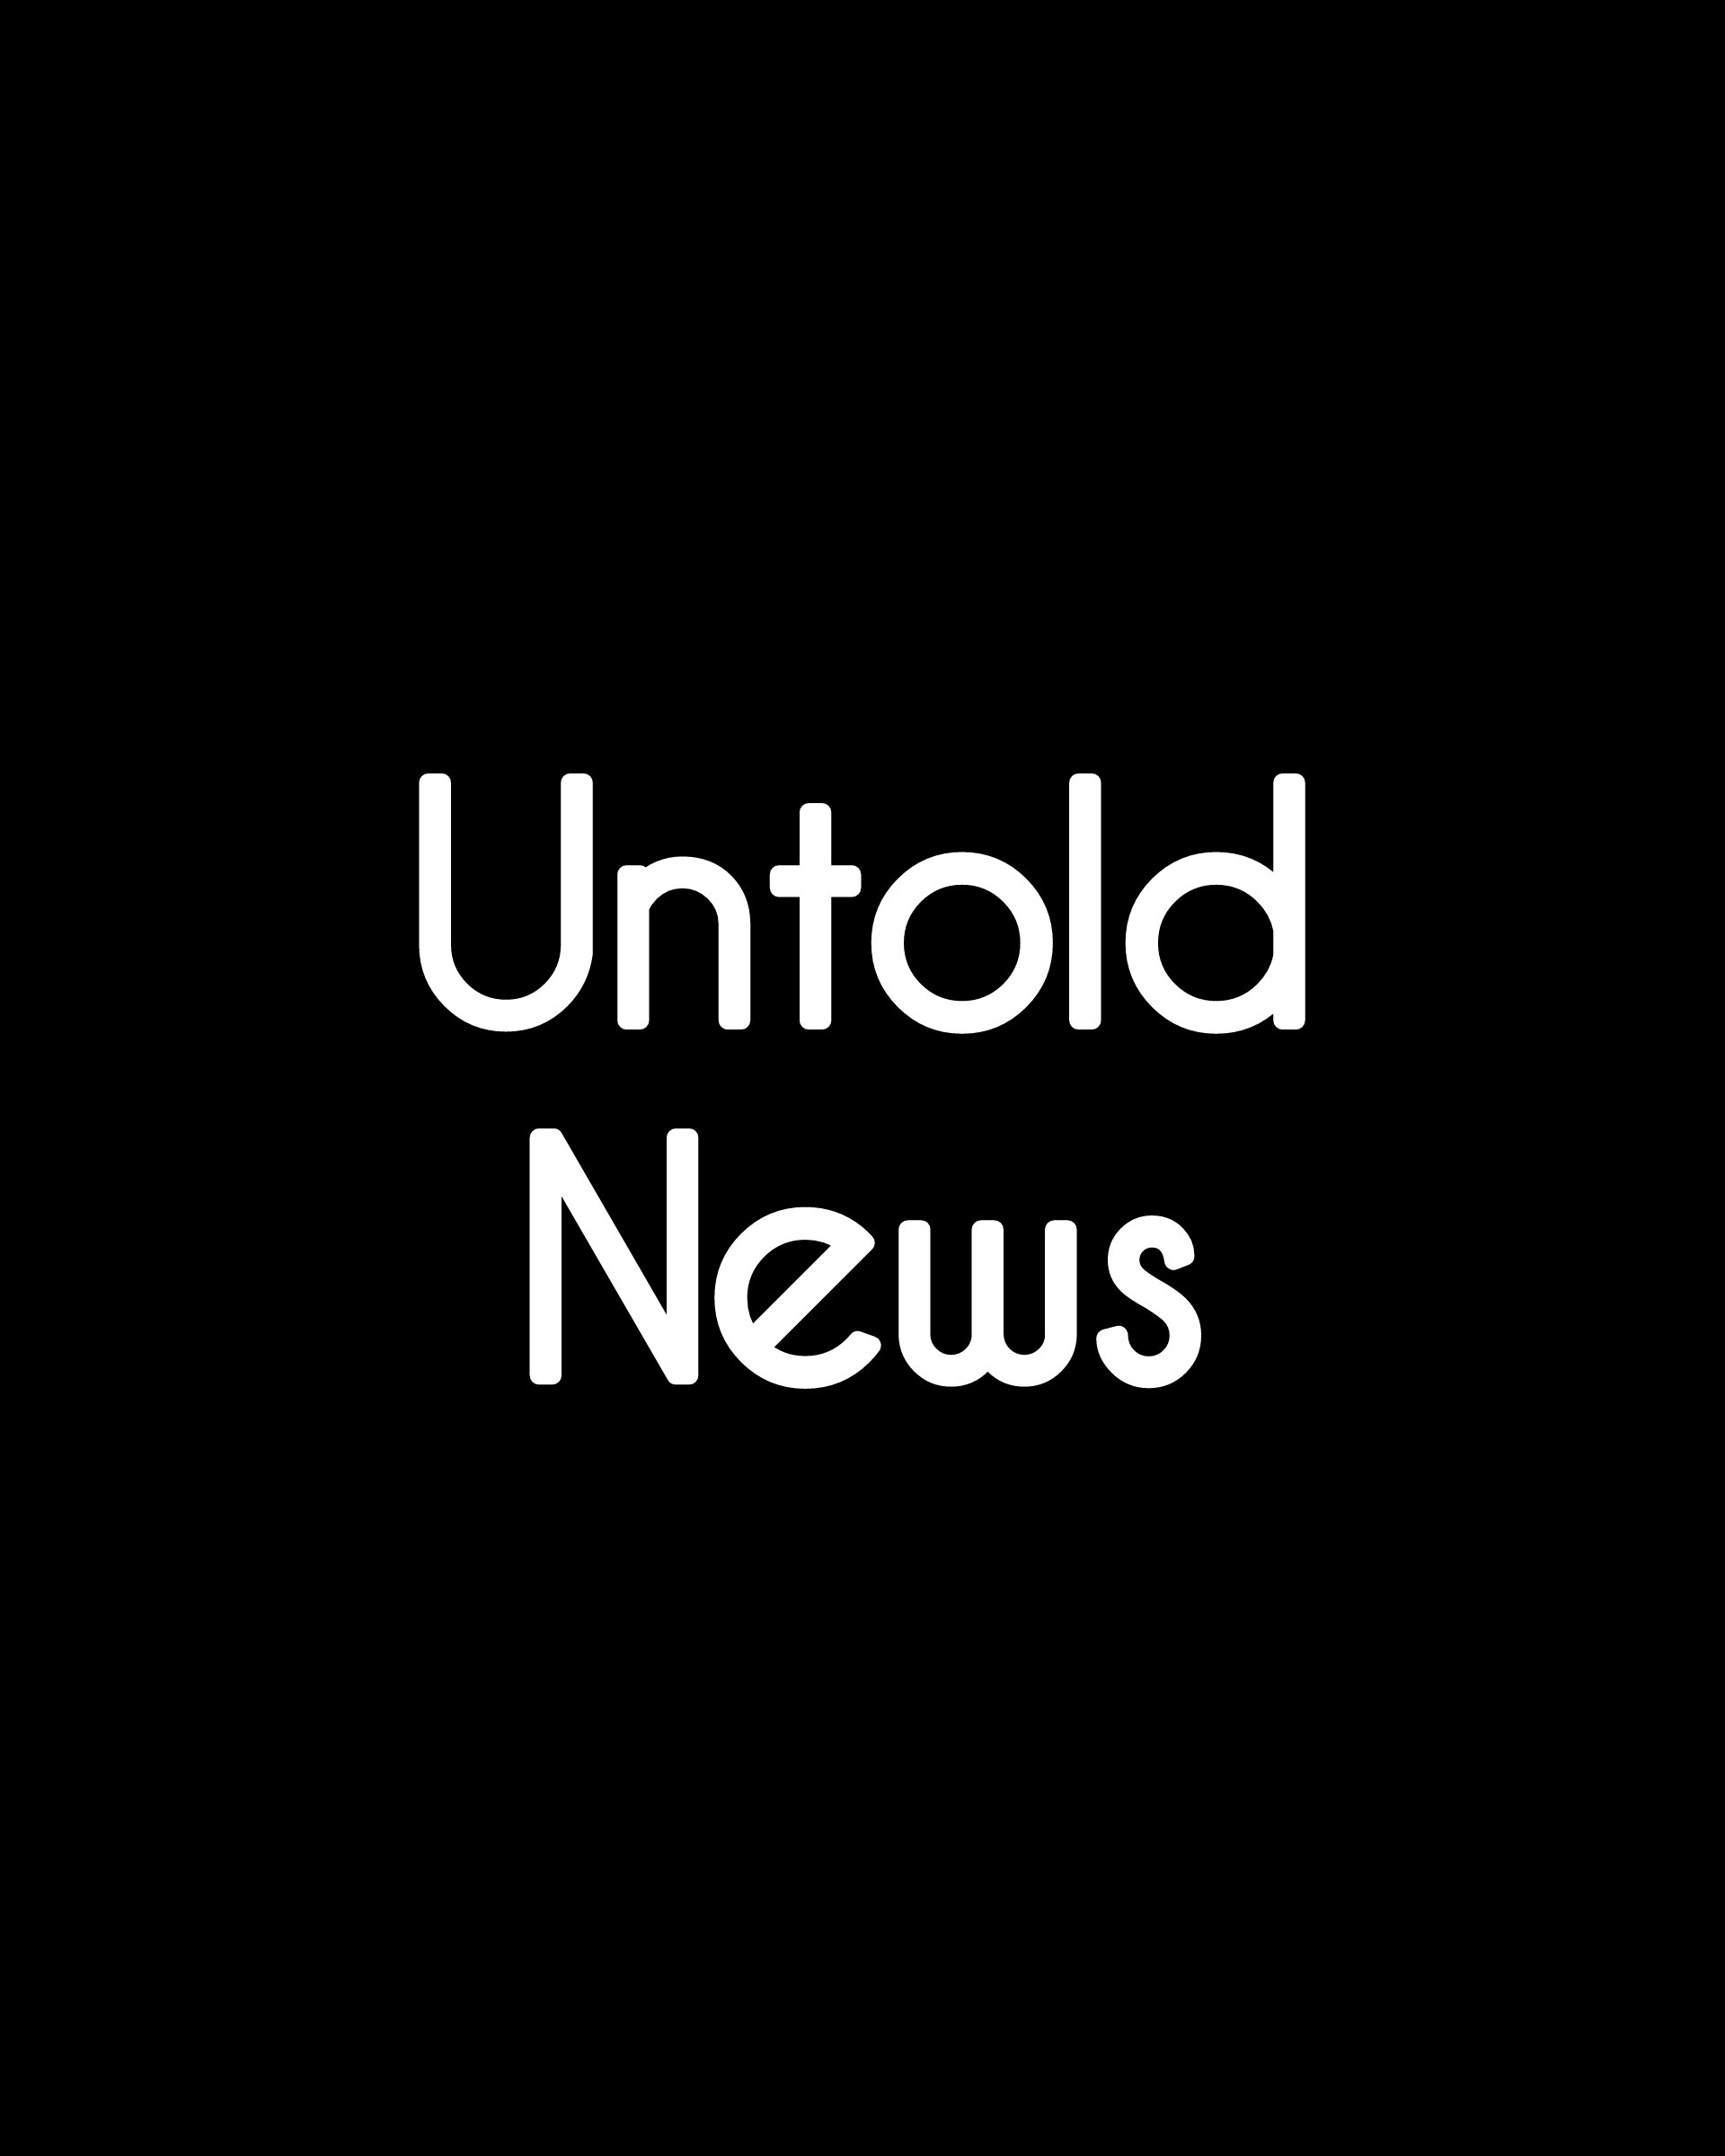 Untold News - We bring you critically important news, which mainstream media hesitate to publish